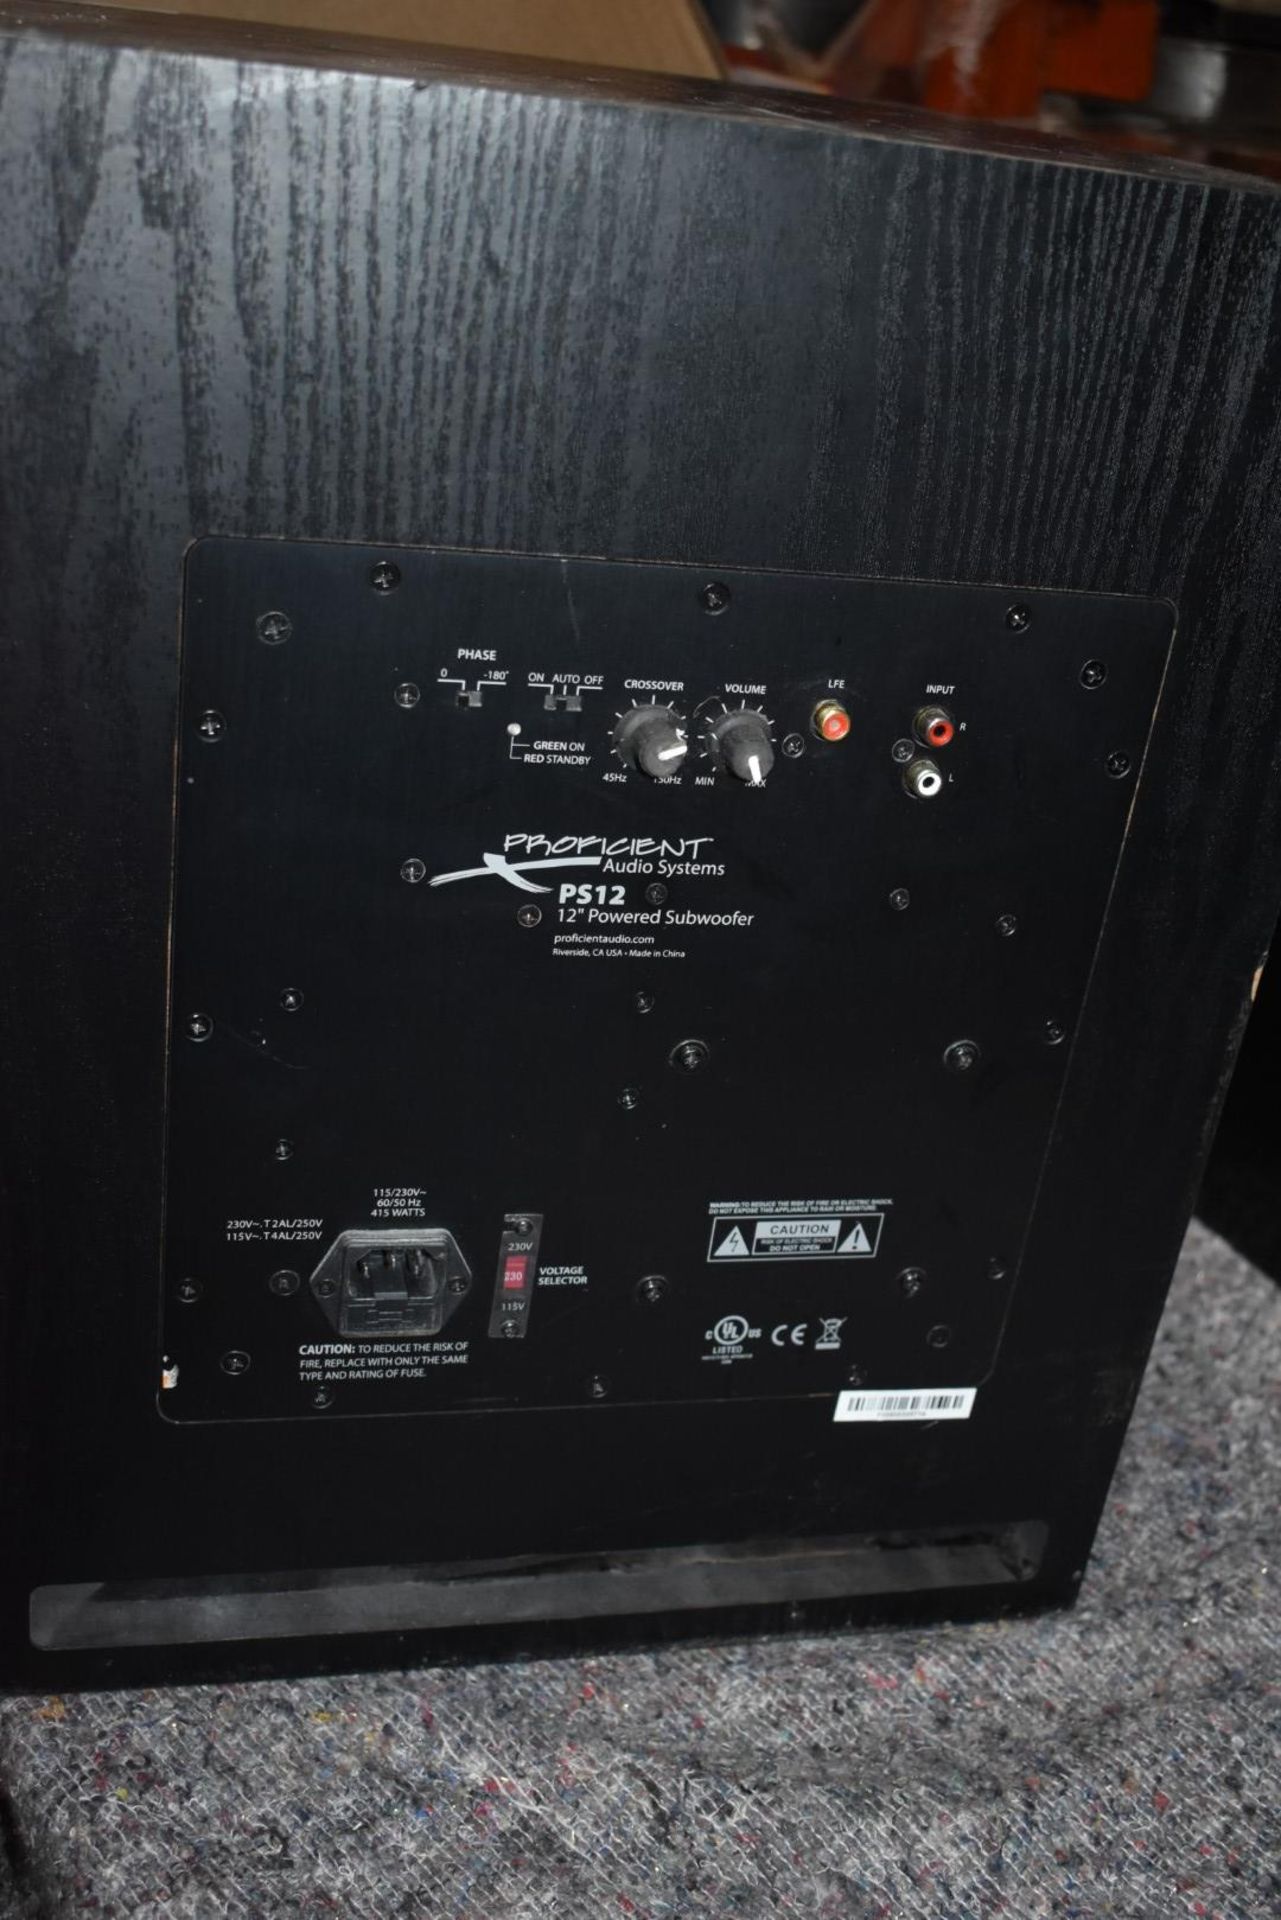 1 x Proficient Audio Systems PS12 12 Inch Powered Subwoofer - Ref: In2107 Pal1 WH1 - CL546 - - Image 3 of 4